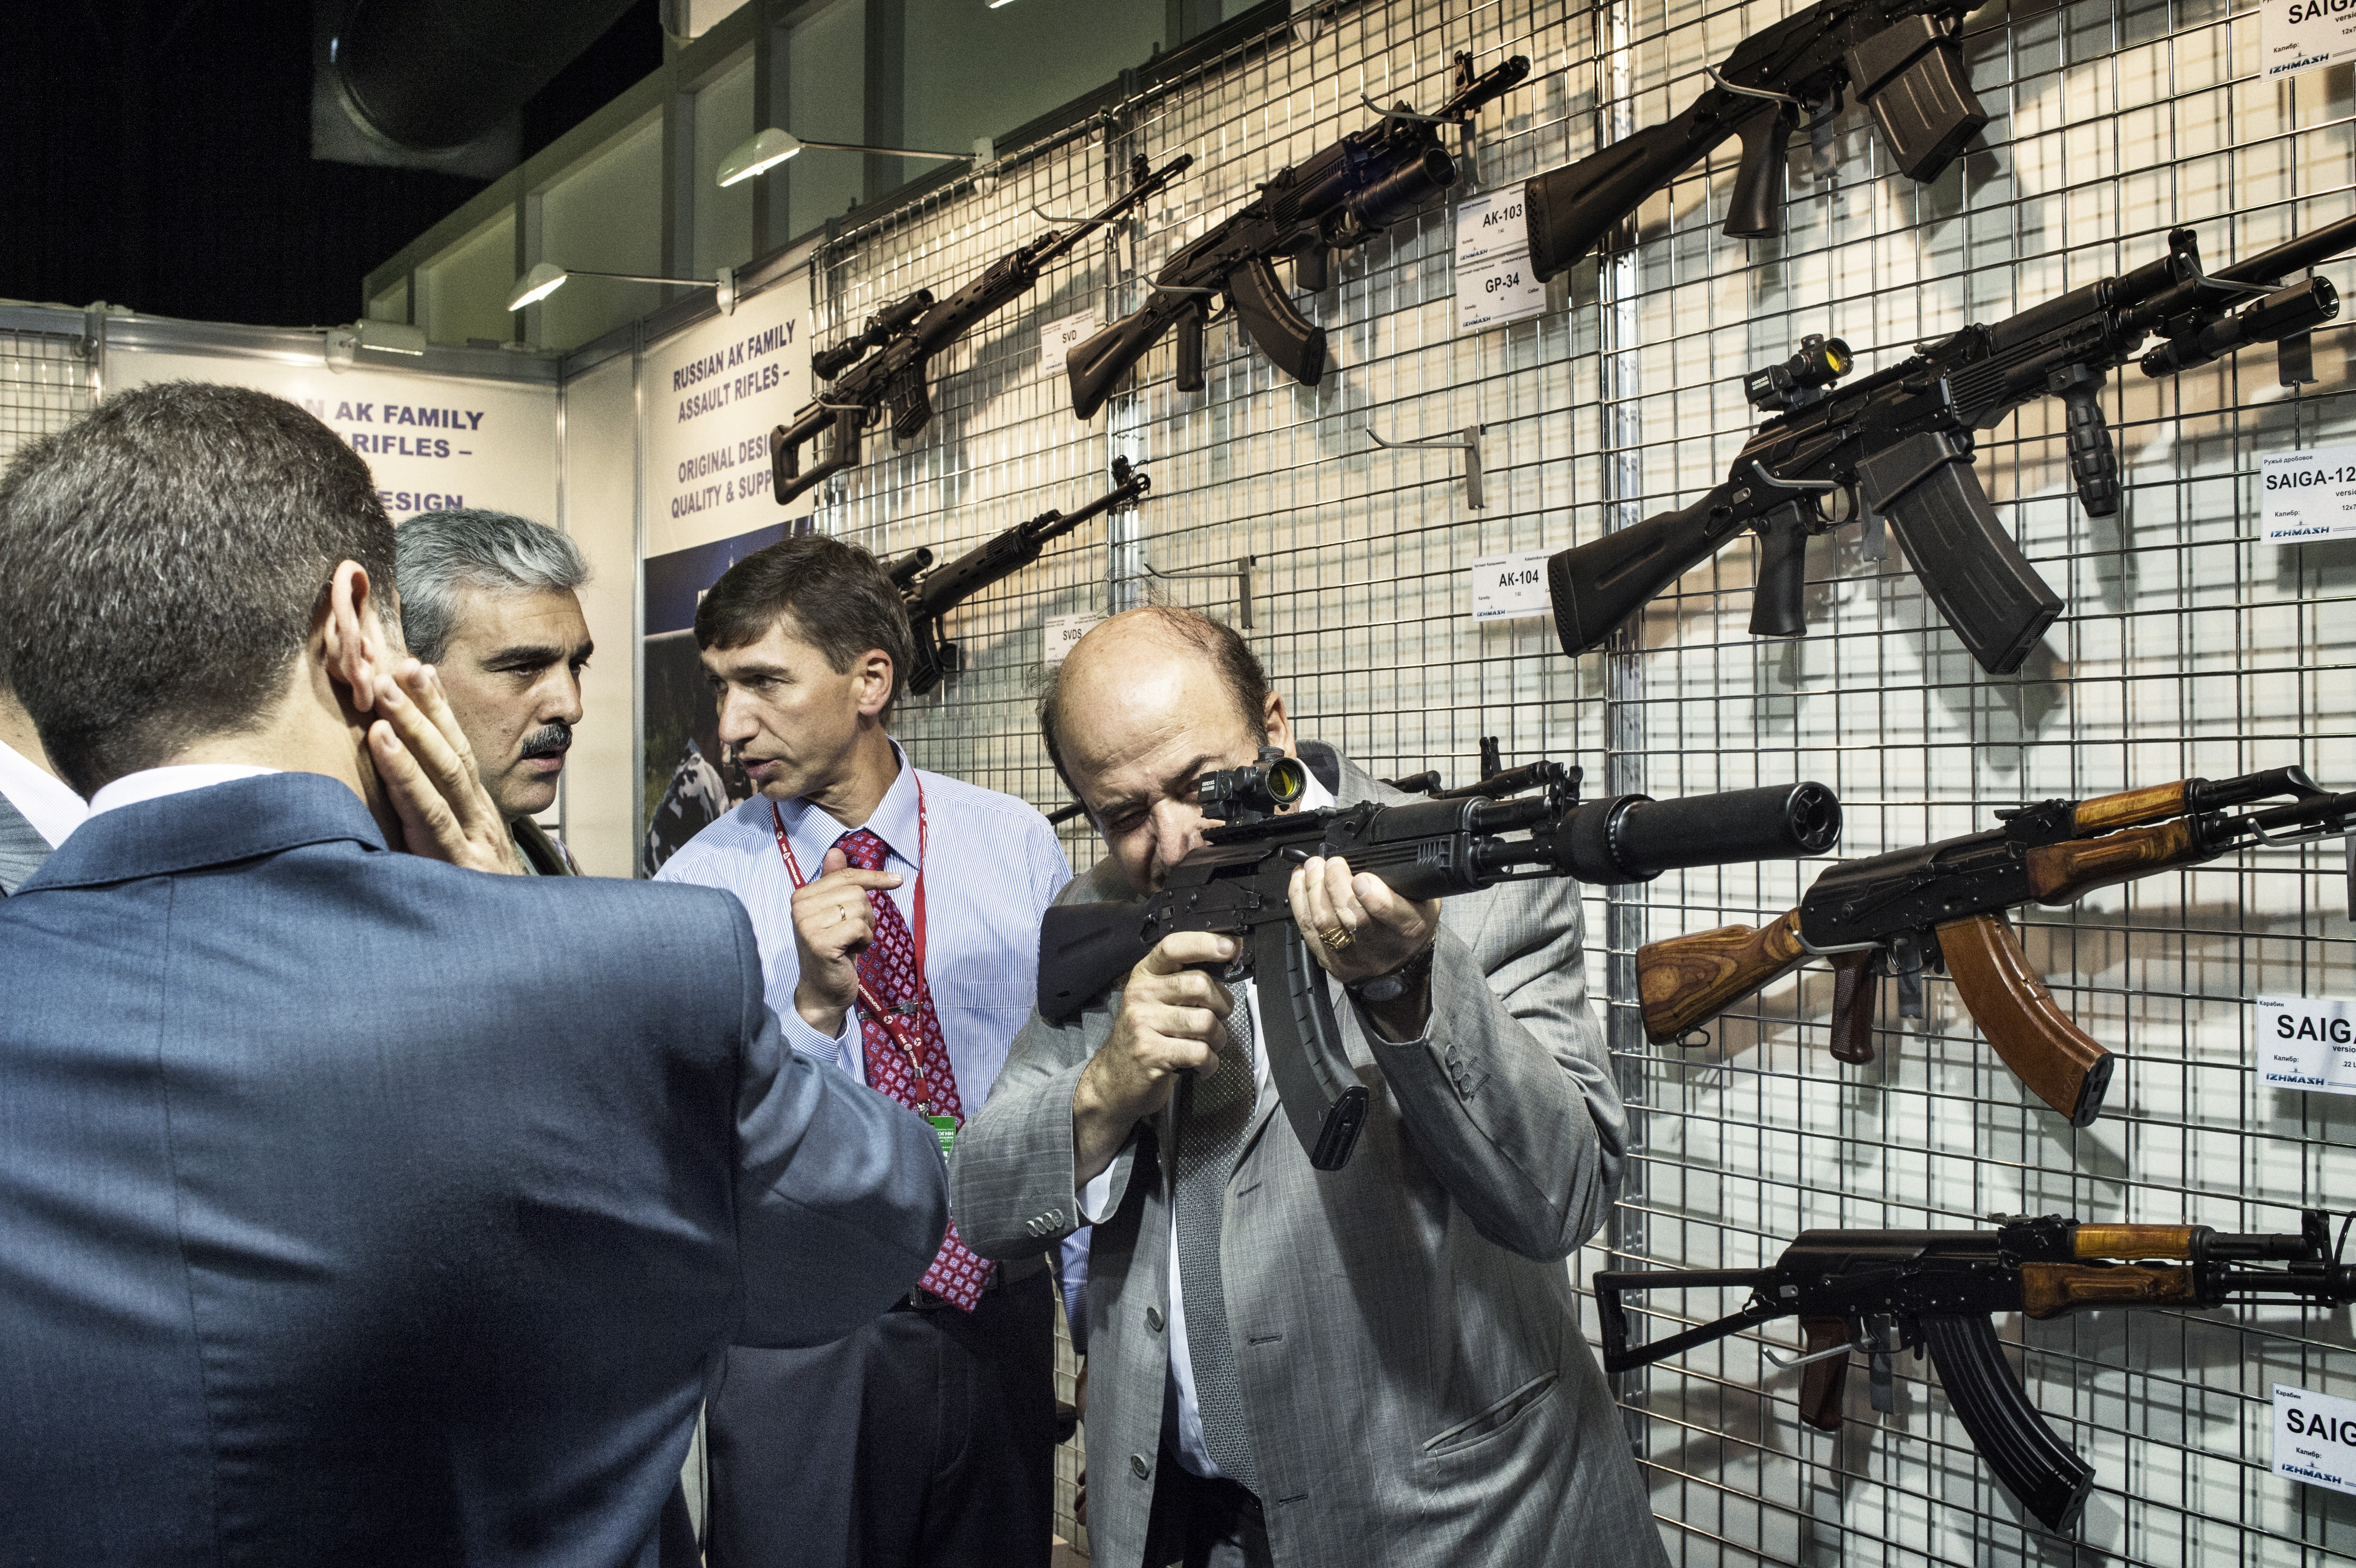 © Yuri Kozyrev / NOOR Caption: Russia, Moscow, 2012, The head of the Syrian delegation to Russia's biennial arms bazaar shakes hands with a representative of Rosoboronexport, the Russian state weapons export monopoly. IG : @noorimages Twitter : @noorimages